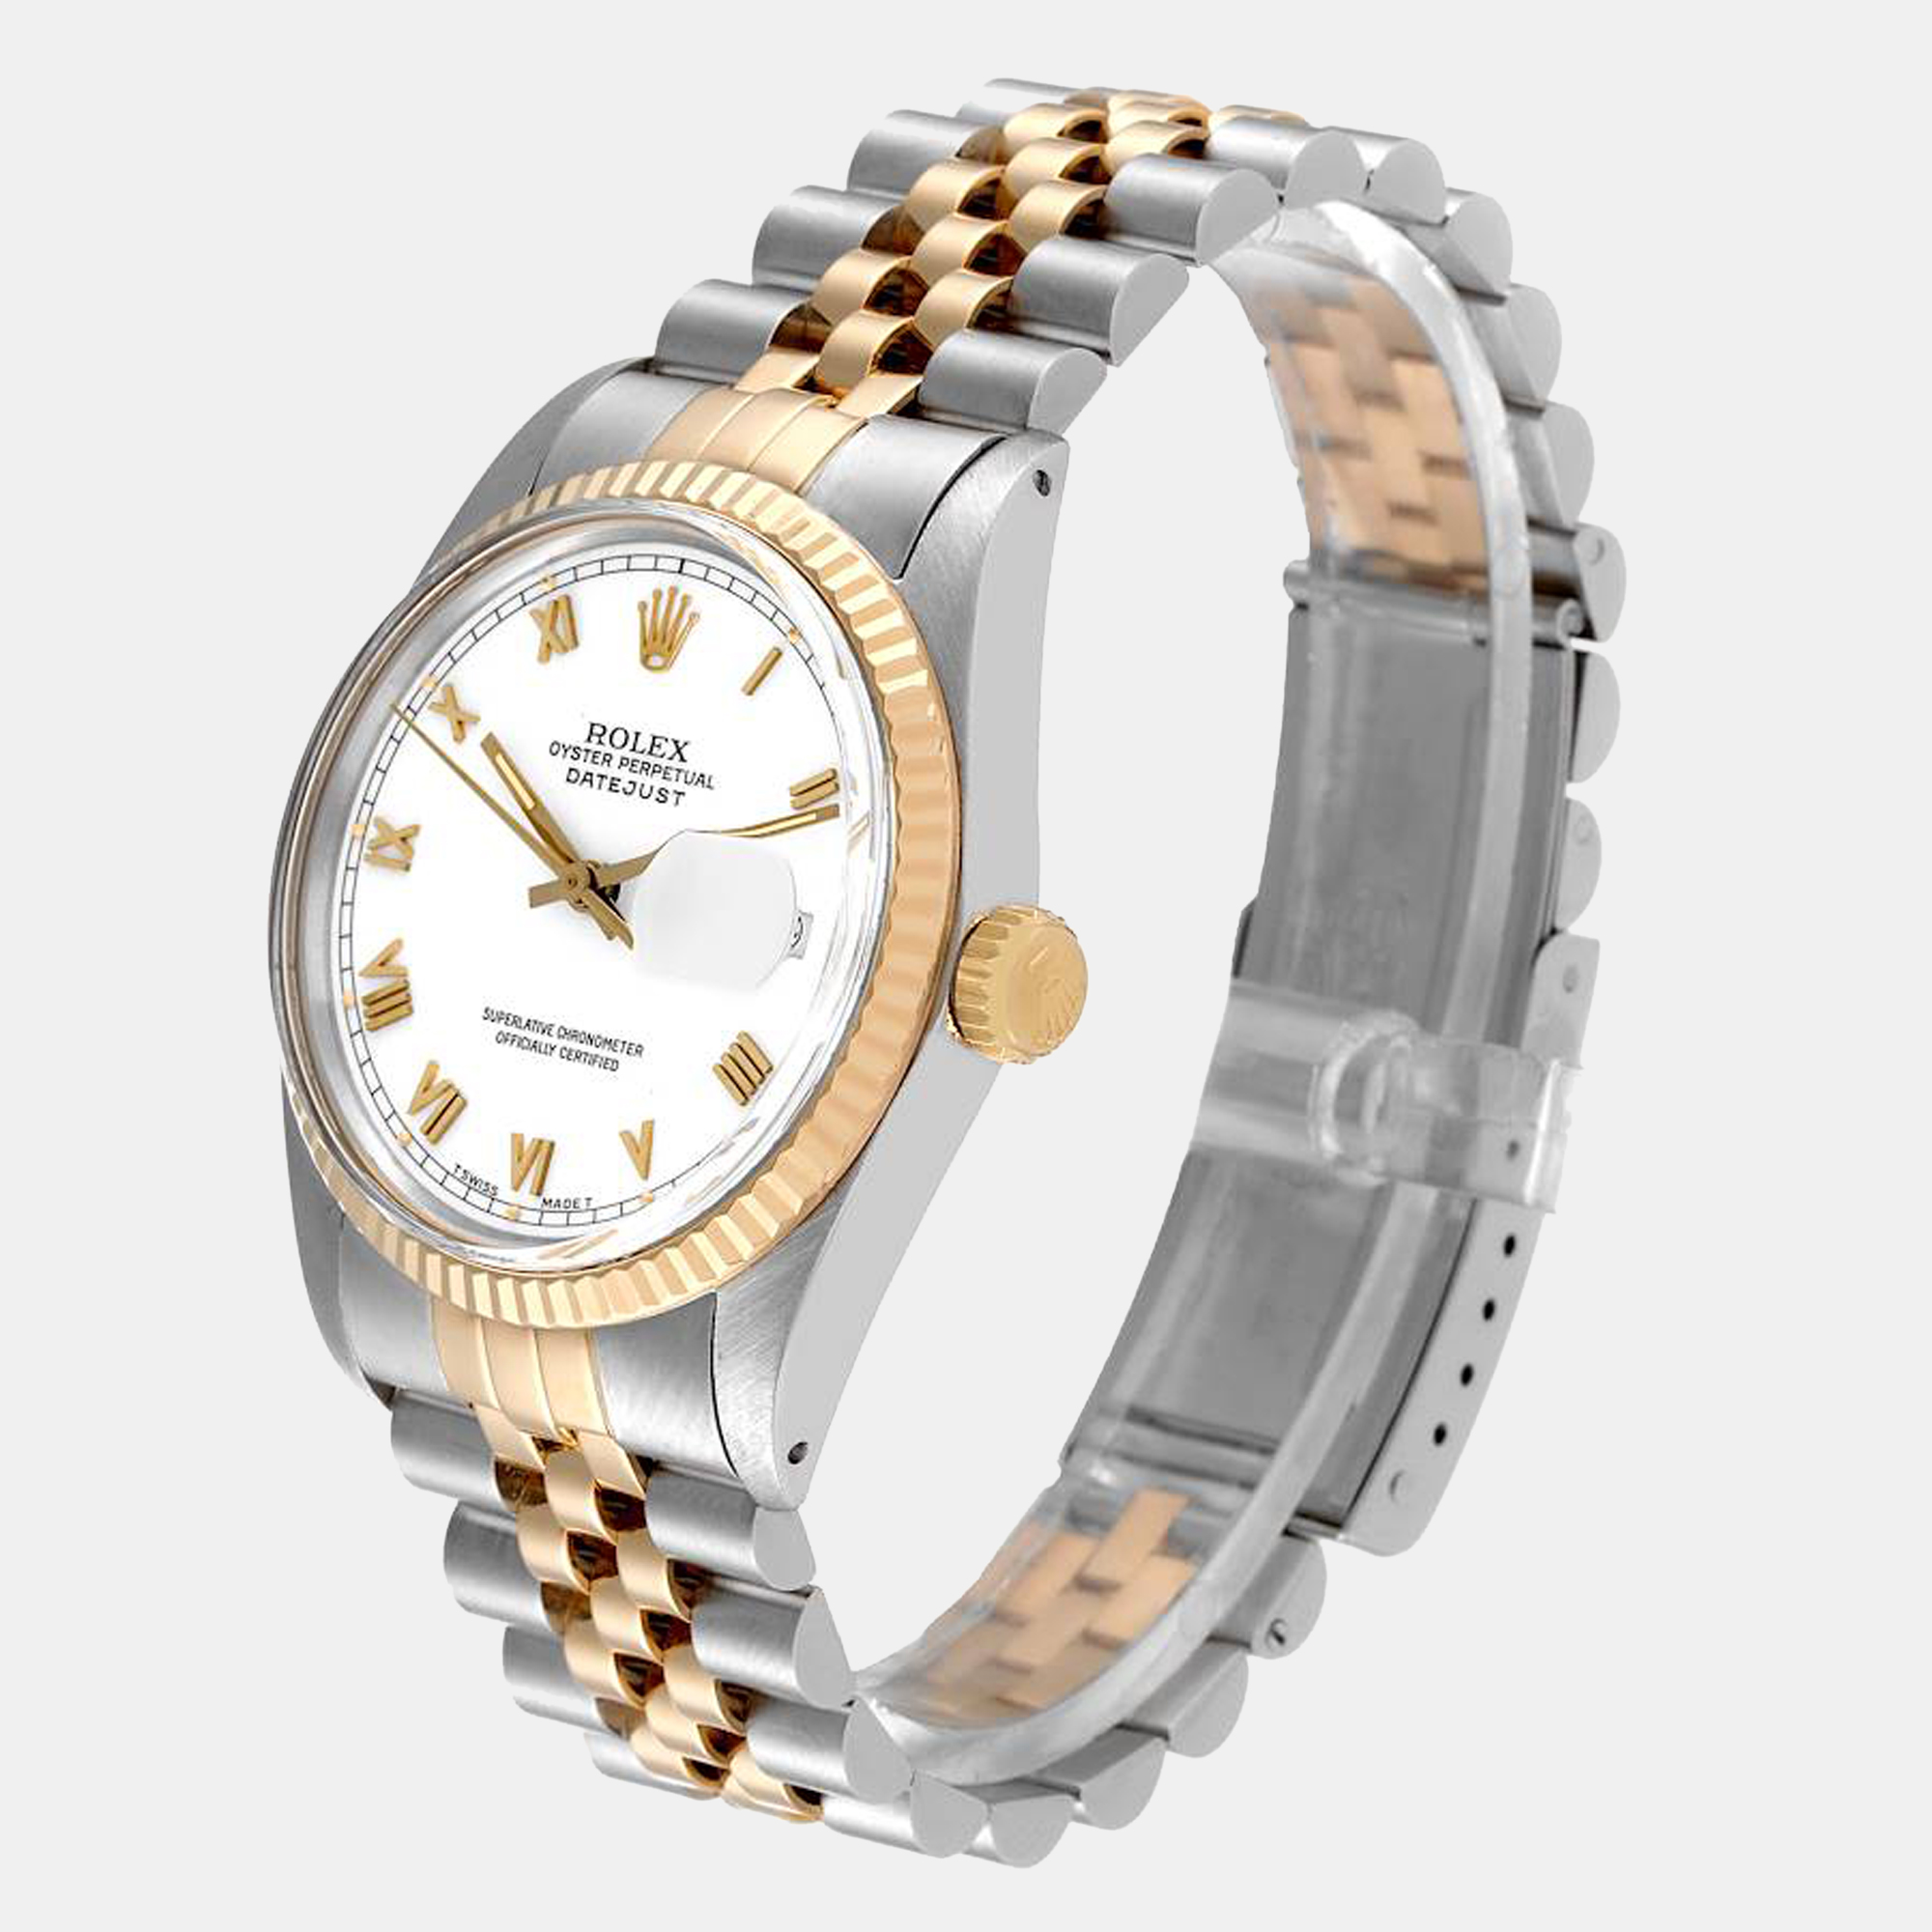 

Rolex White 18k Yellow Gold And Stainless Steel Datejust 16013 Automatic Men's Wristwatch 36 mm